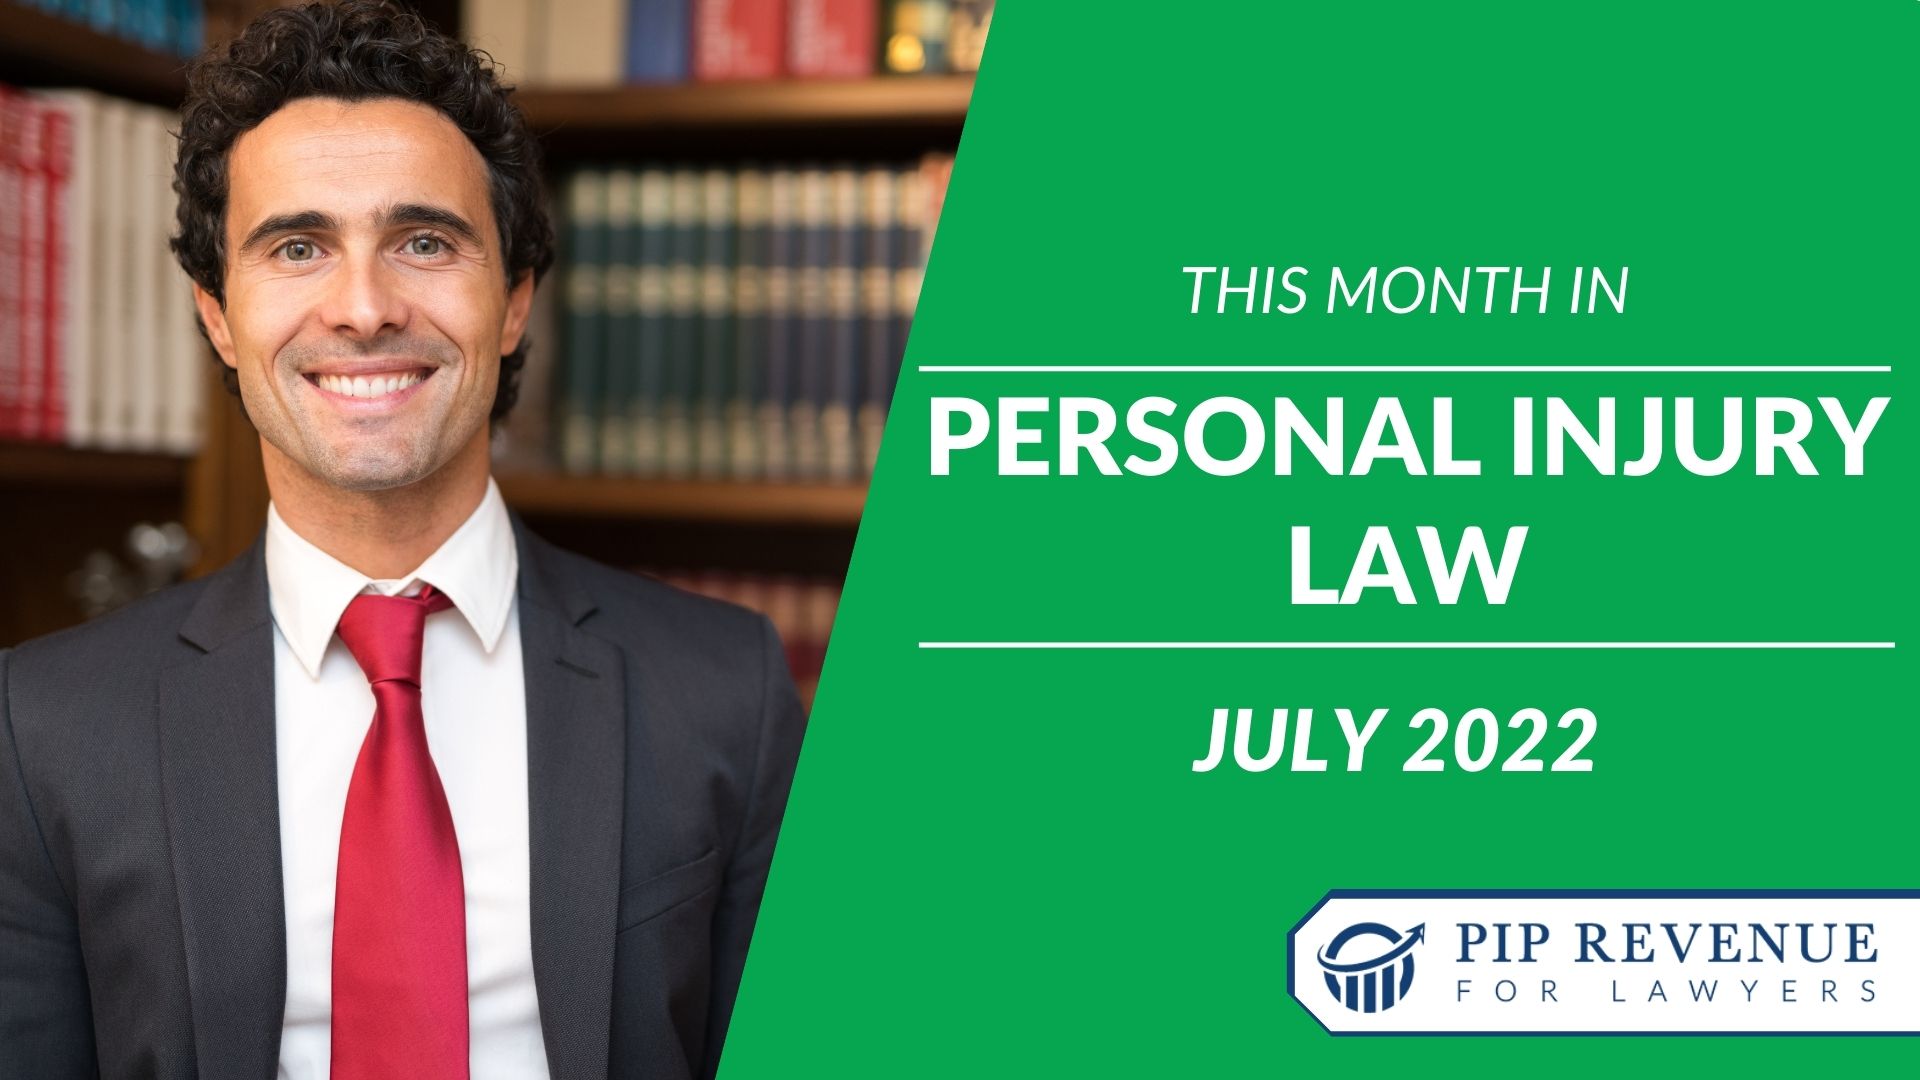 This Month in Personal Injury Law - July 2022